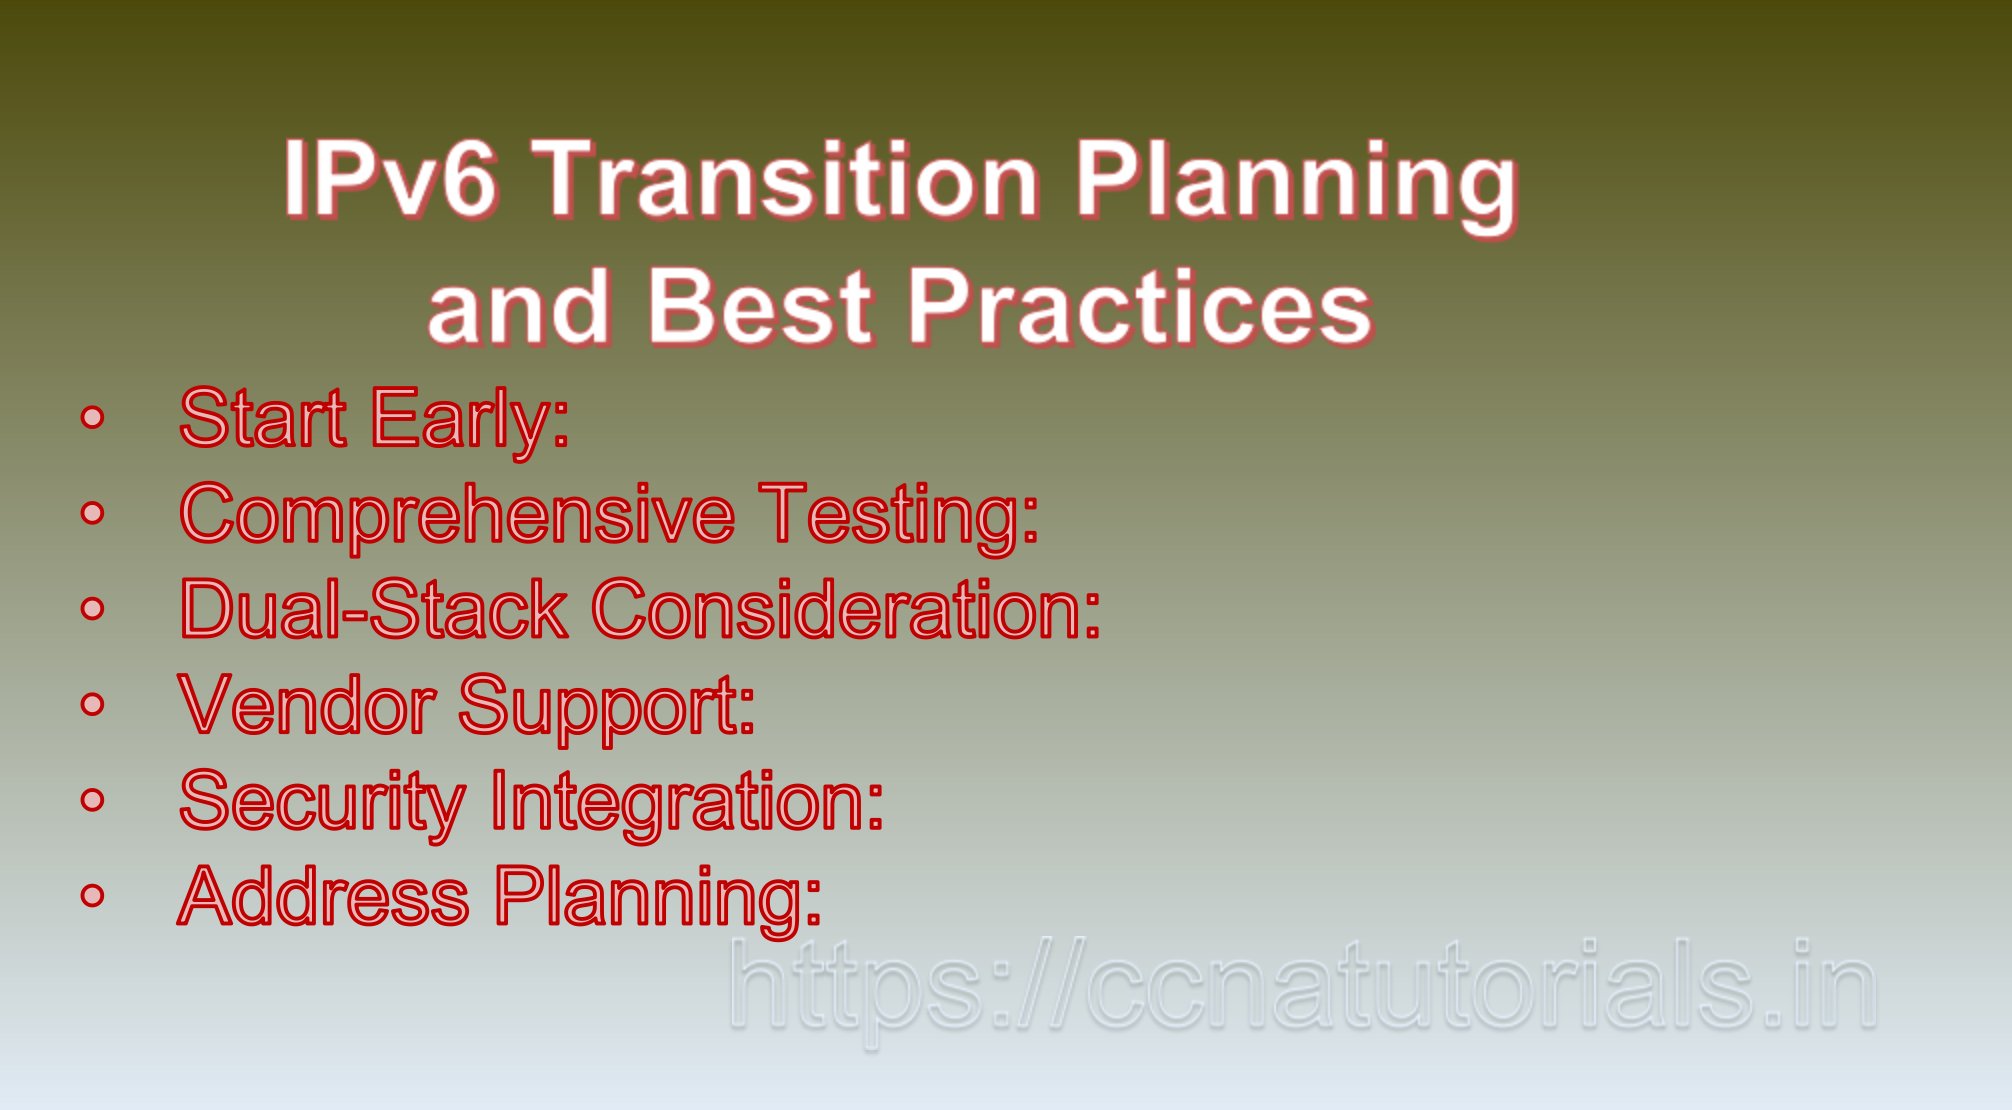 IPv6 Transition Planning and Best Practices, ccna , ccna tutorials